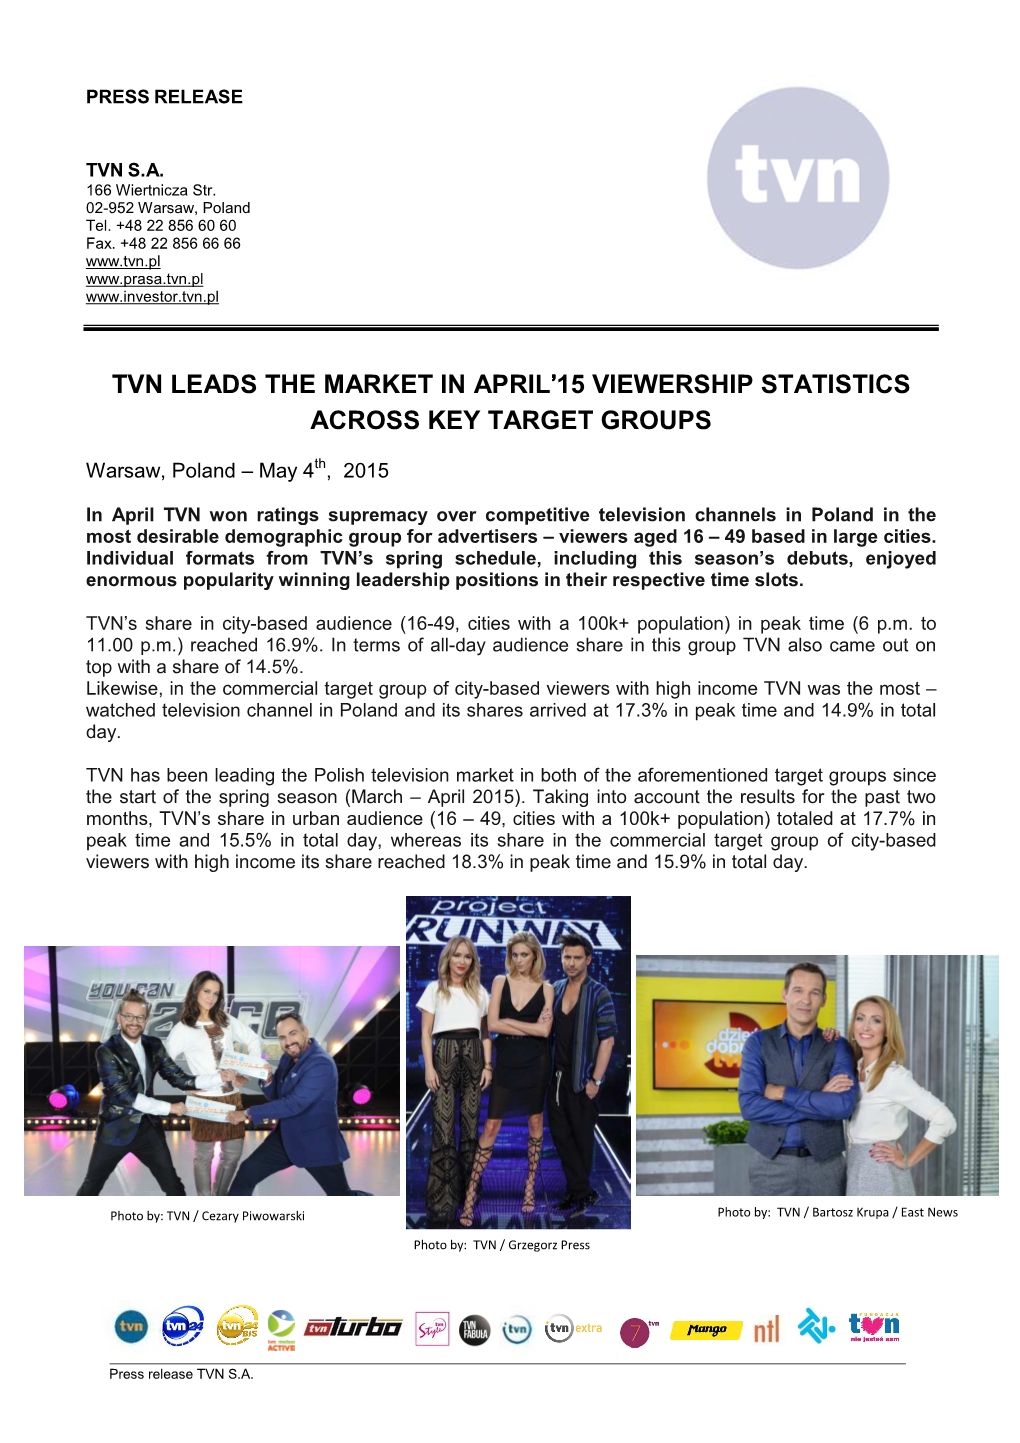 Tvn Leads the Market in April'15 Viewership Statistics Across Key